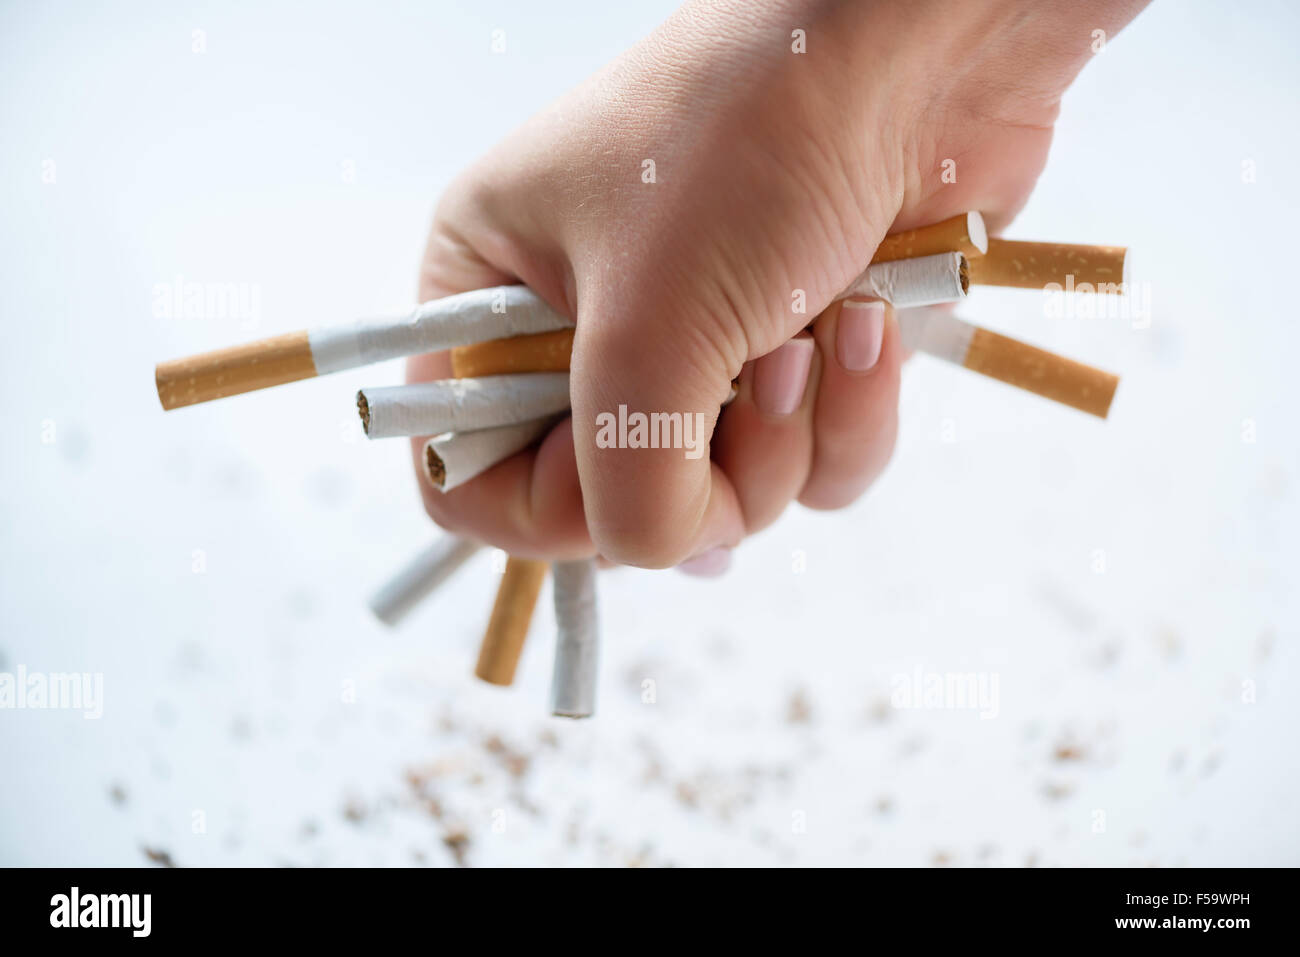 Bunch of cigarettes in hands Stock Photo